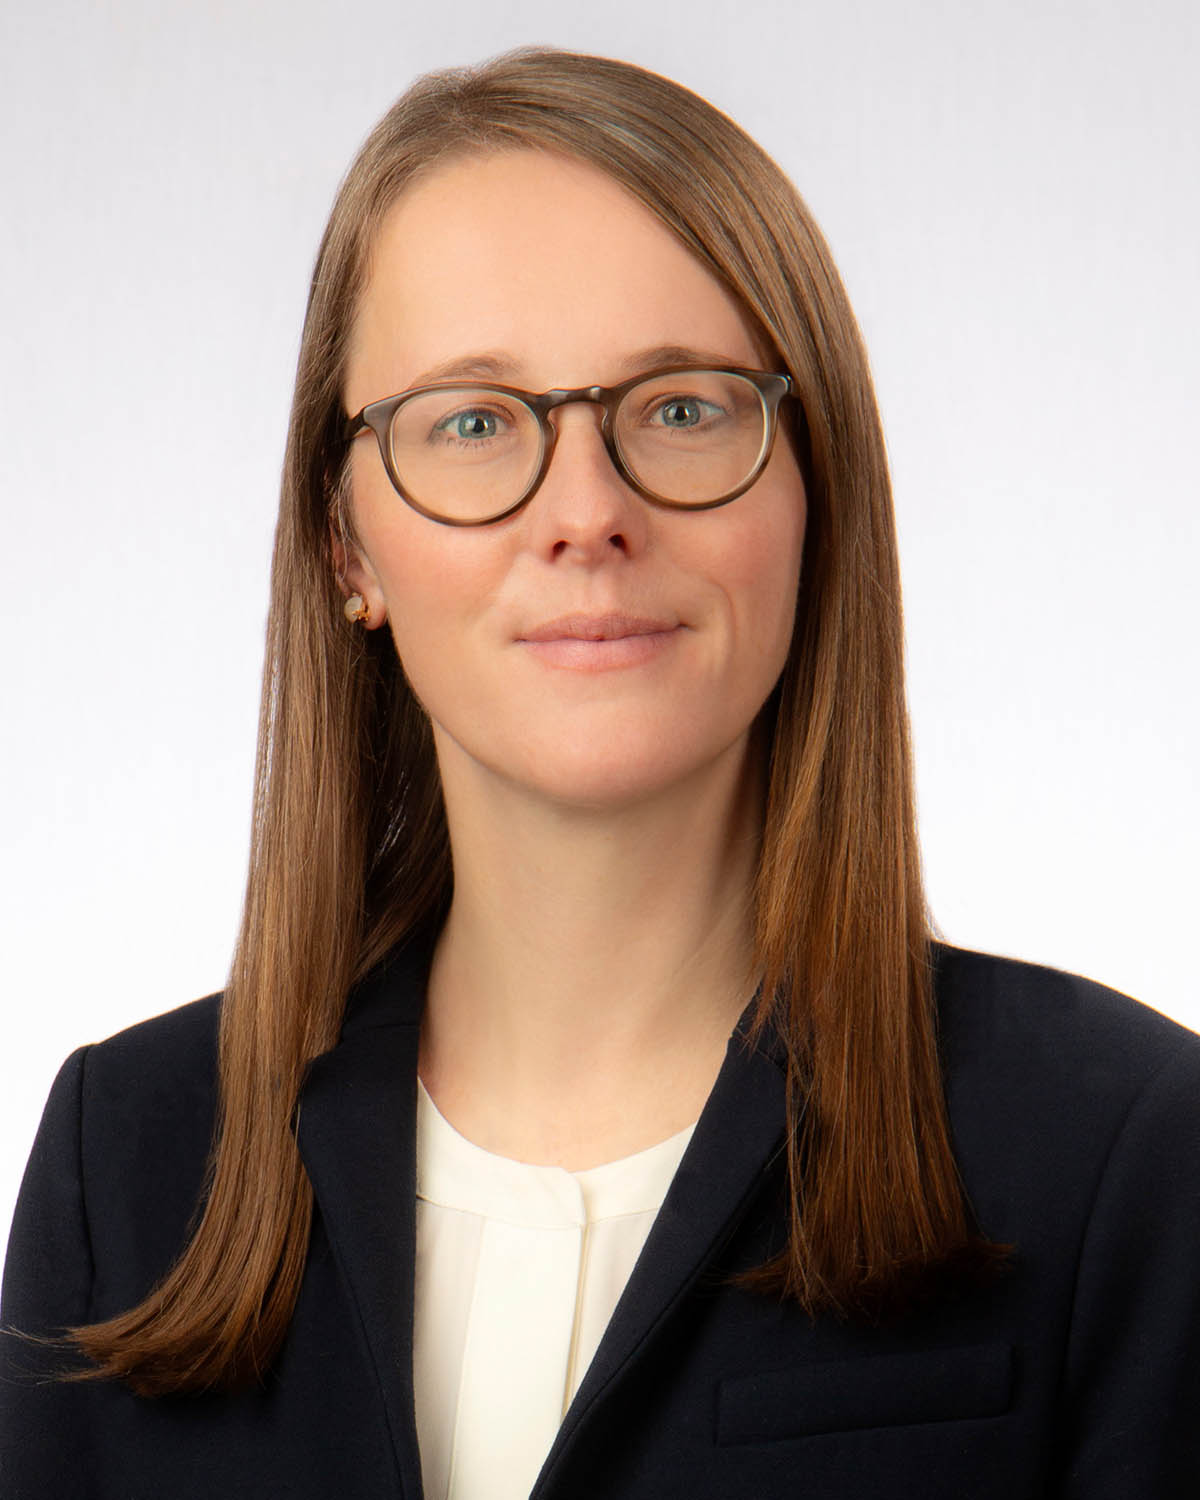 Kate Campbell joins Godfrey & Kahn's data-privacy group | Wisconsin Law Journal - WI Legal News & Resources